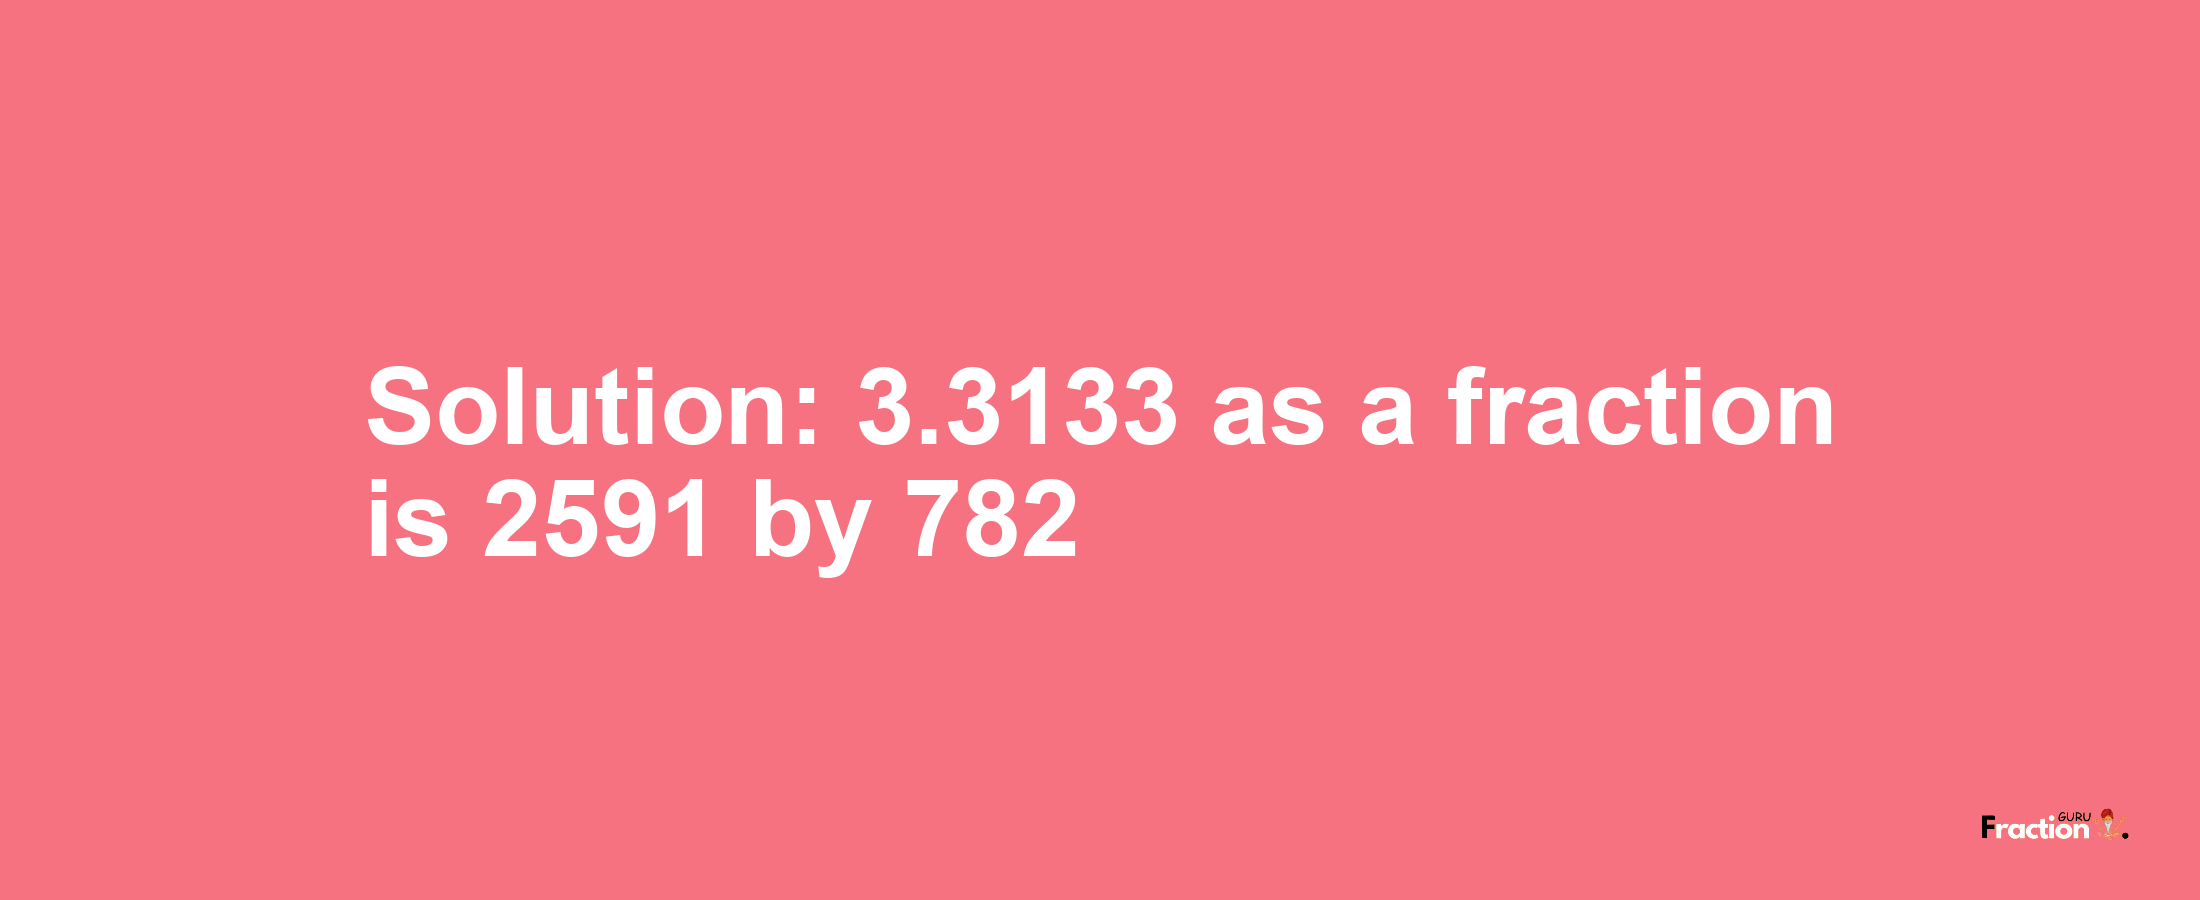 Solution:3.3133 as a fraction is 2591/782